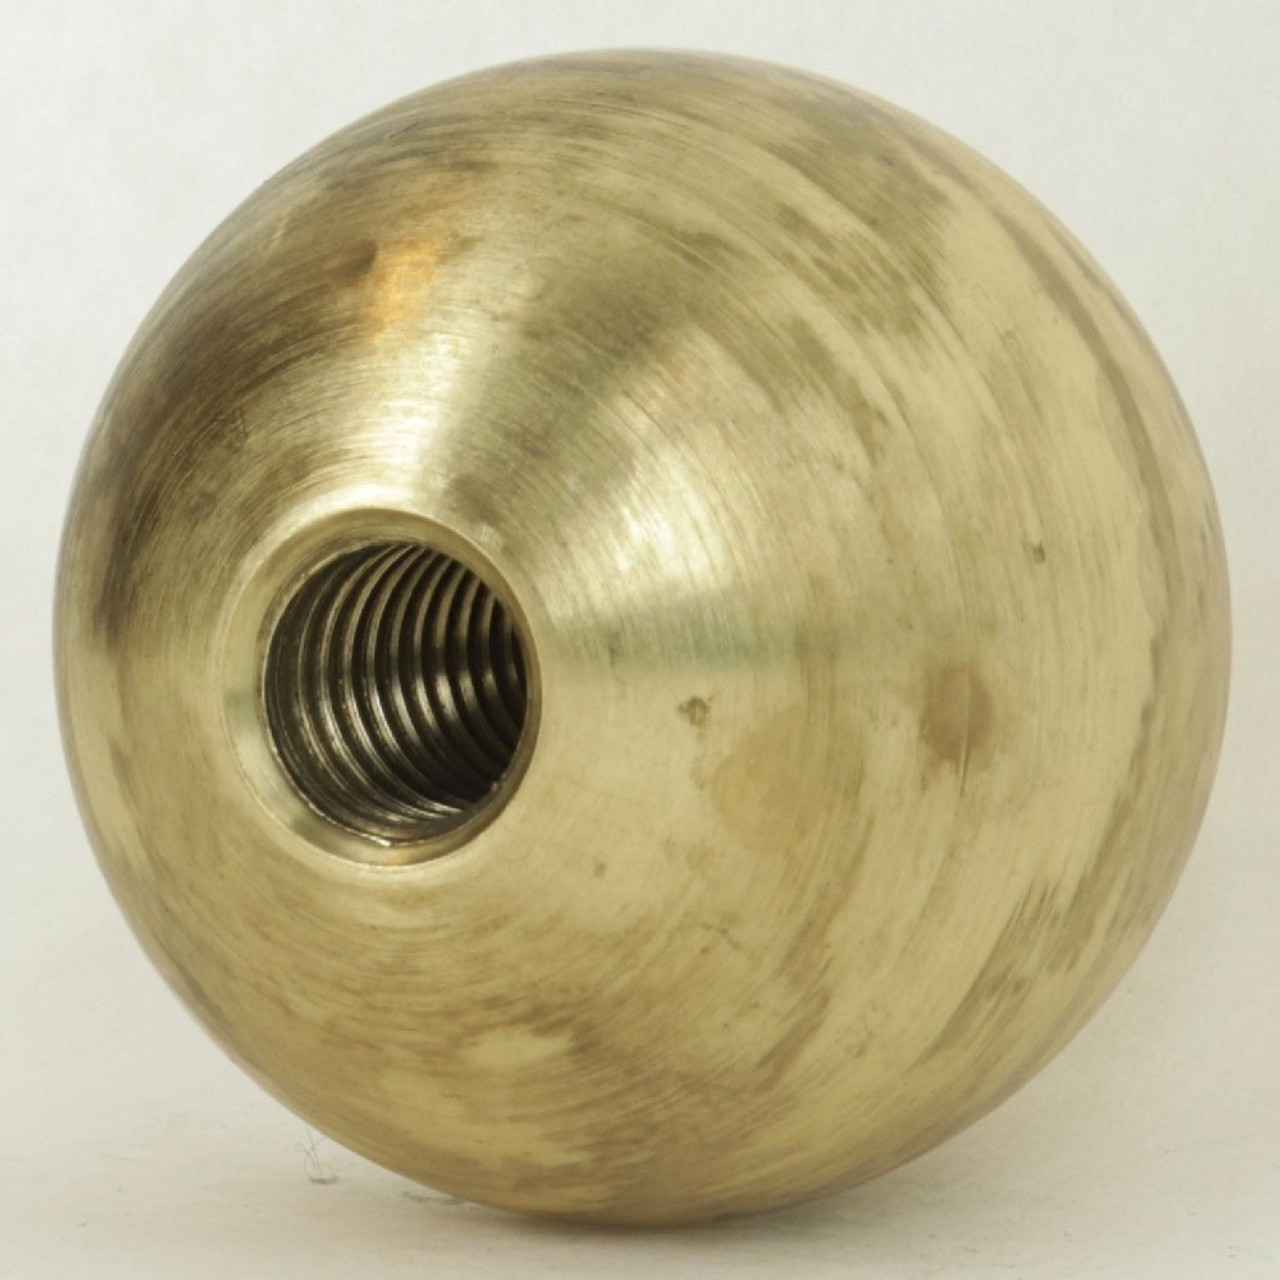 1-1/2in. Solid Brass Ball 3/8-16 UNC Female Threaded Hole - Unfinished Brass